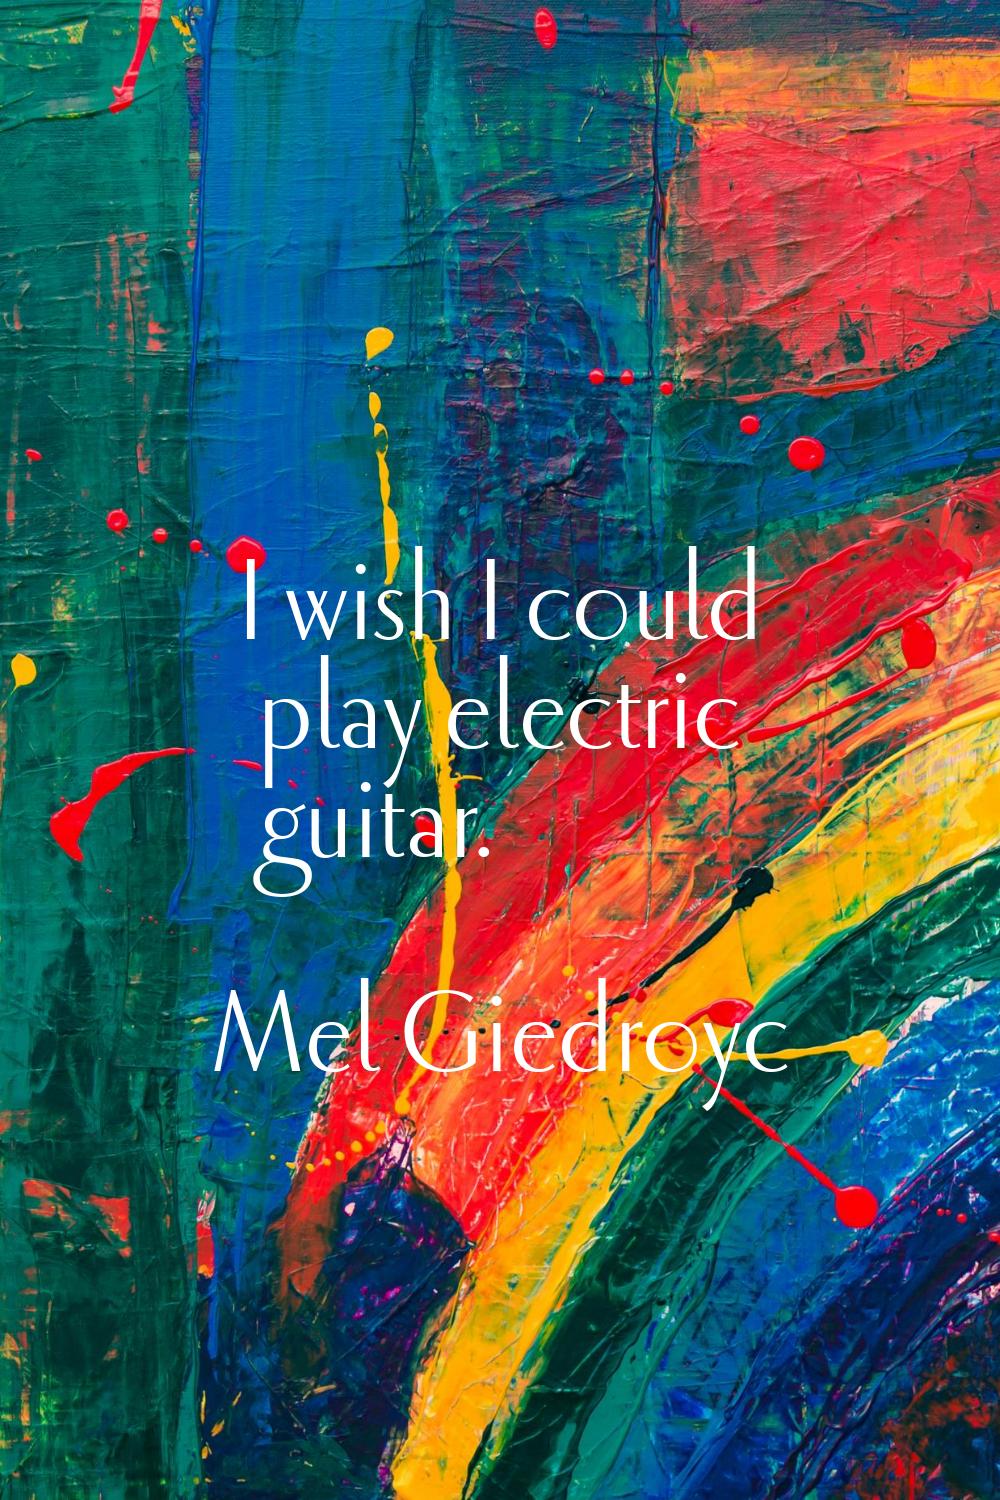 I wish I could play electric guitar.